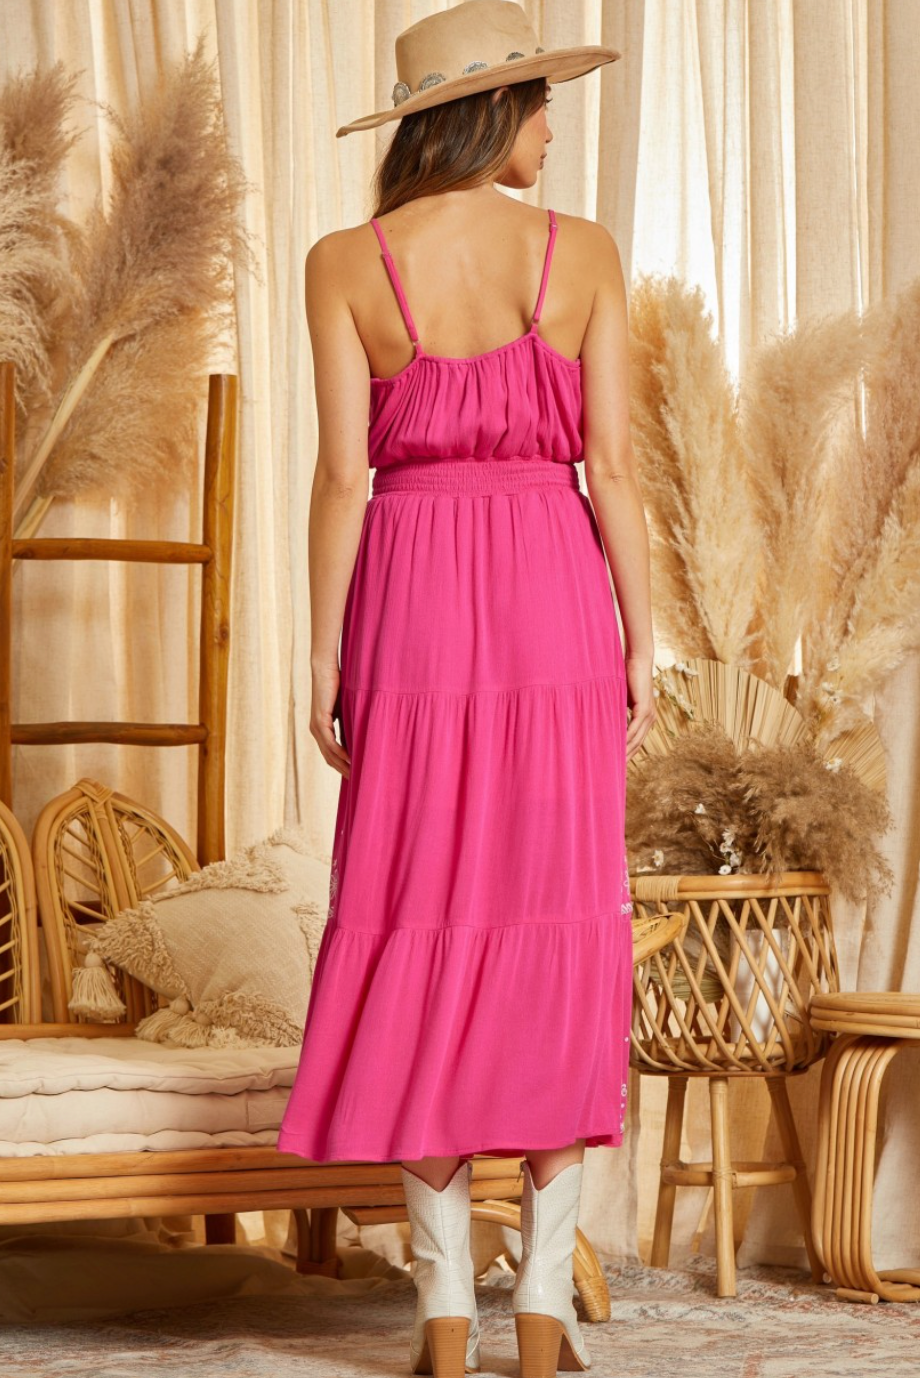 Sweetheart Neckline Embroidered Maxi Dress in Hot Pink - The Street Boutique 